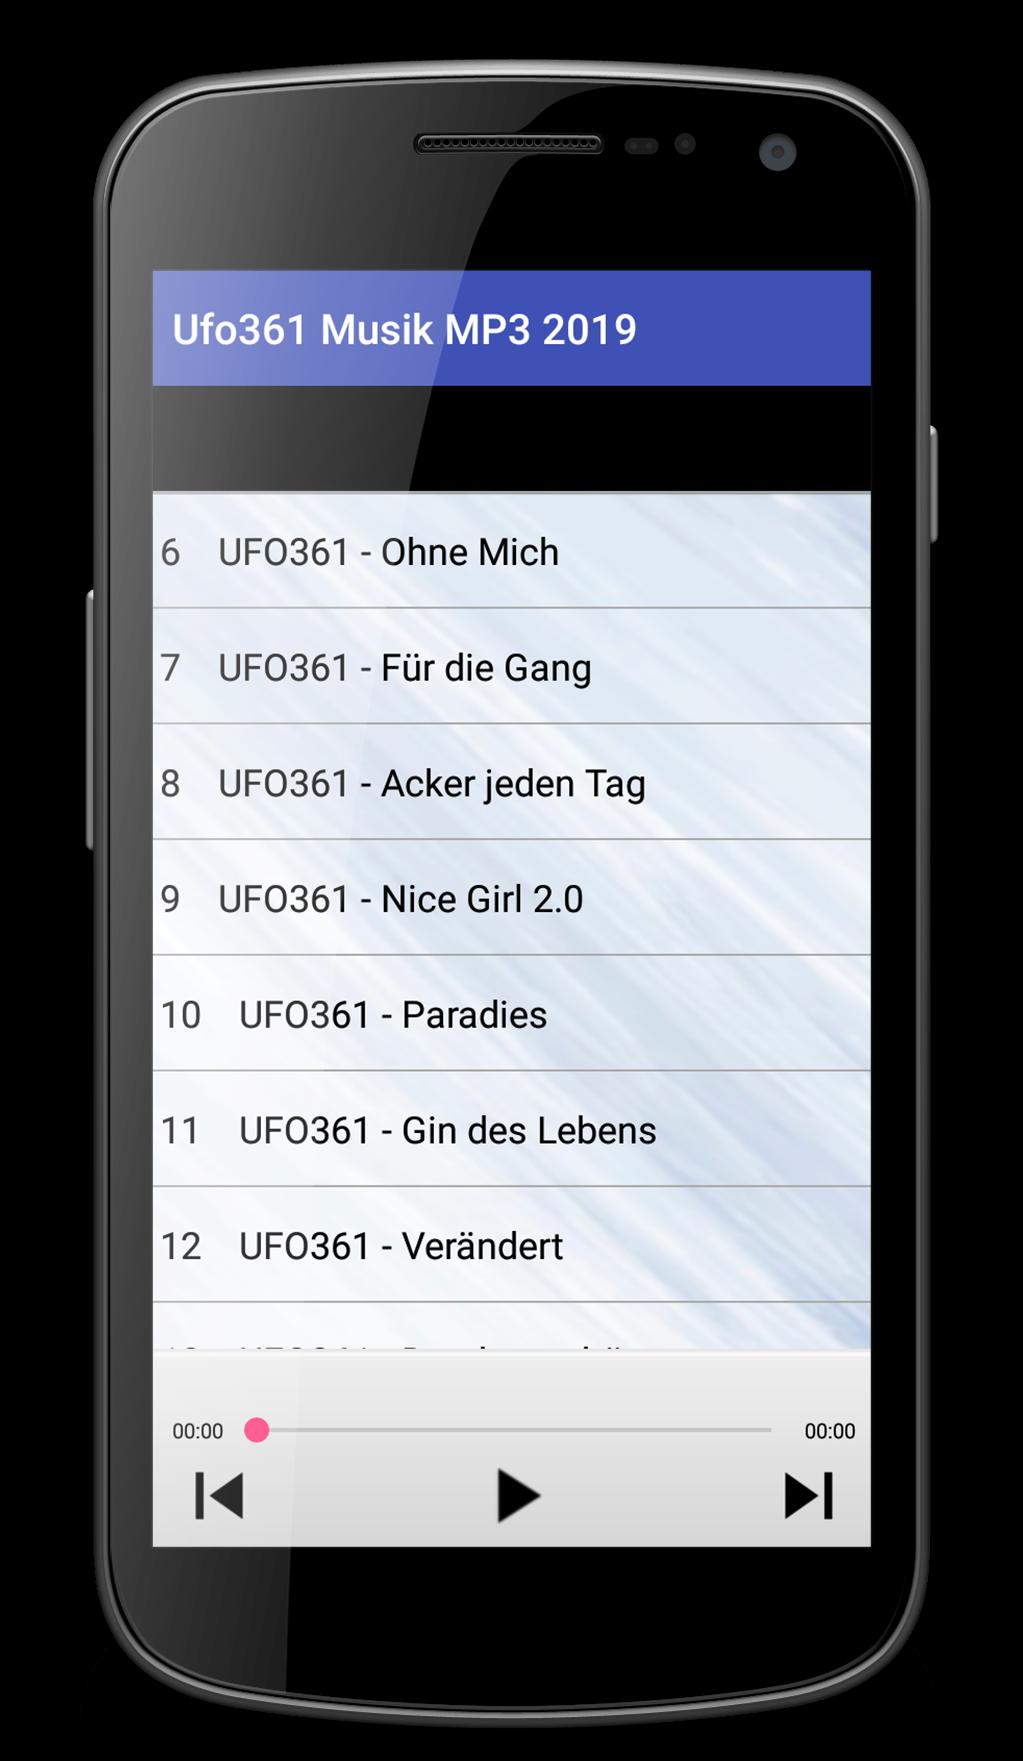 Ufo361 Musik MP3 2019 for Android - APK Download